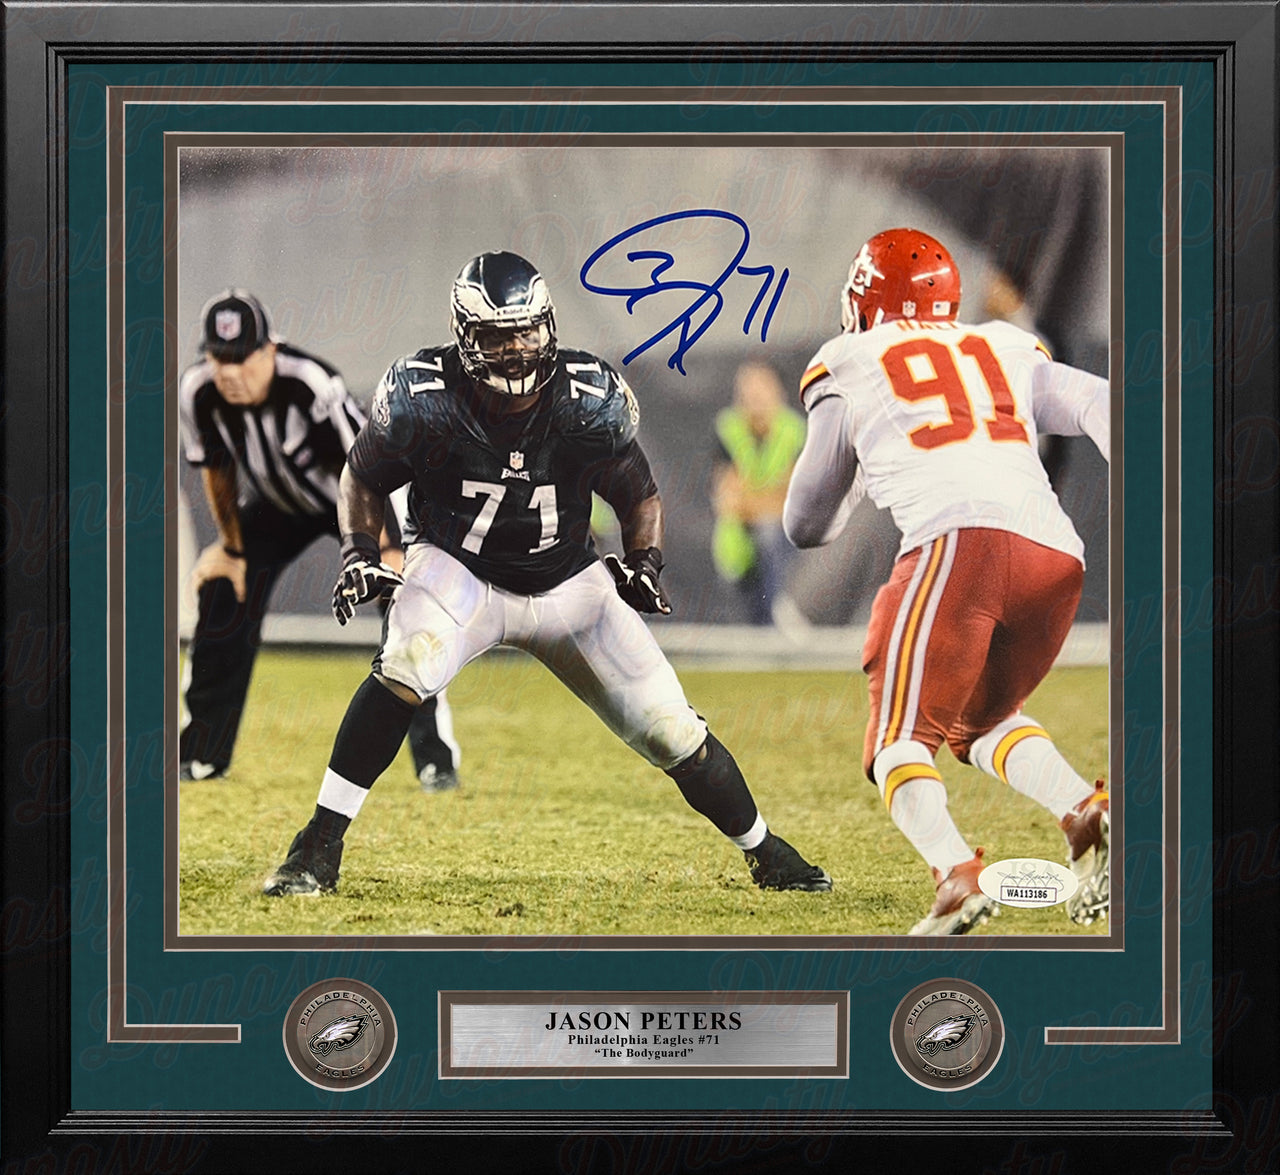 Jason Peters in Action Philadelphia Eagles Autographed Framed Football Photo - Dynasty Sports & Framing 